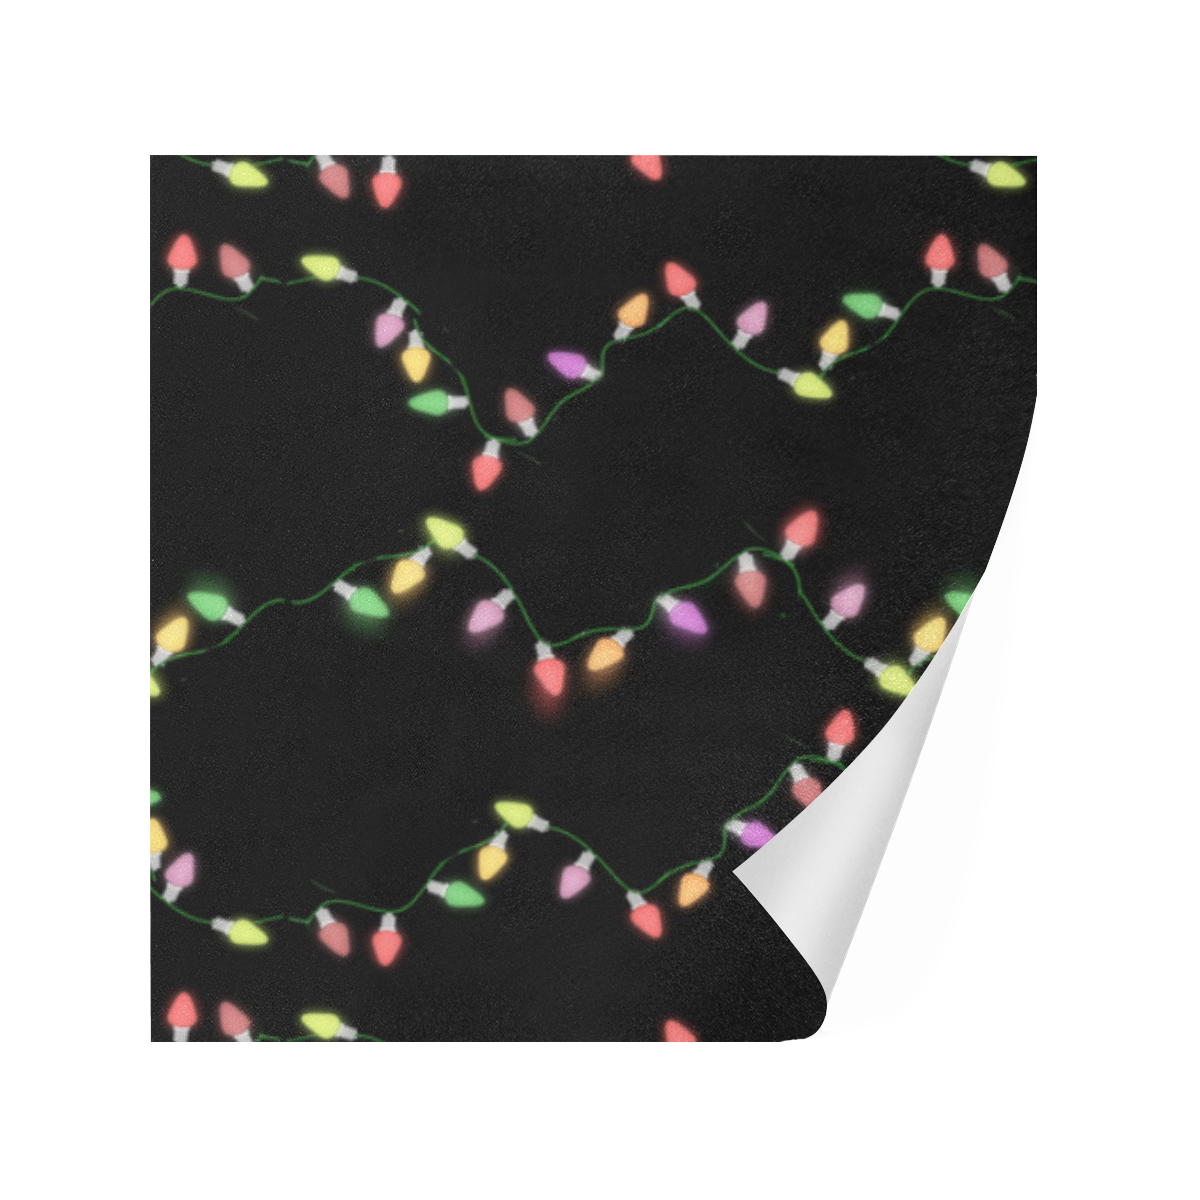 Festive Christmas Lights on Black Gift Wrapping Paper 58"x 23" (3 Rolls)